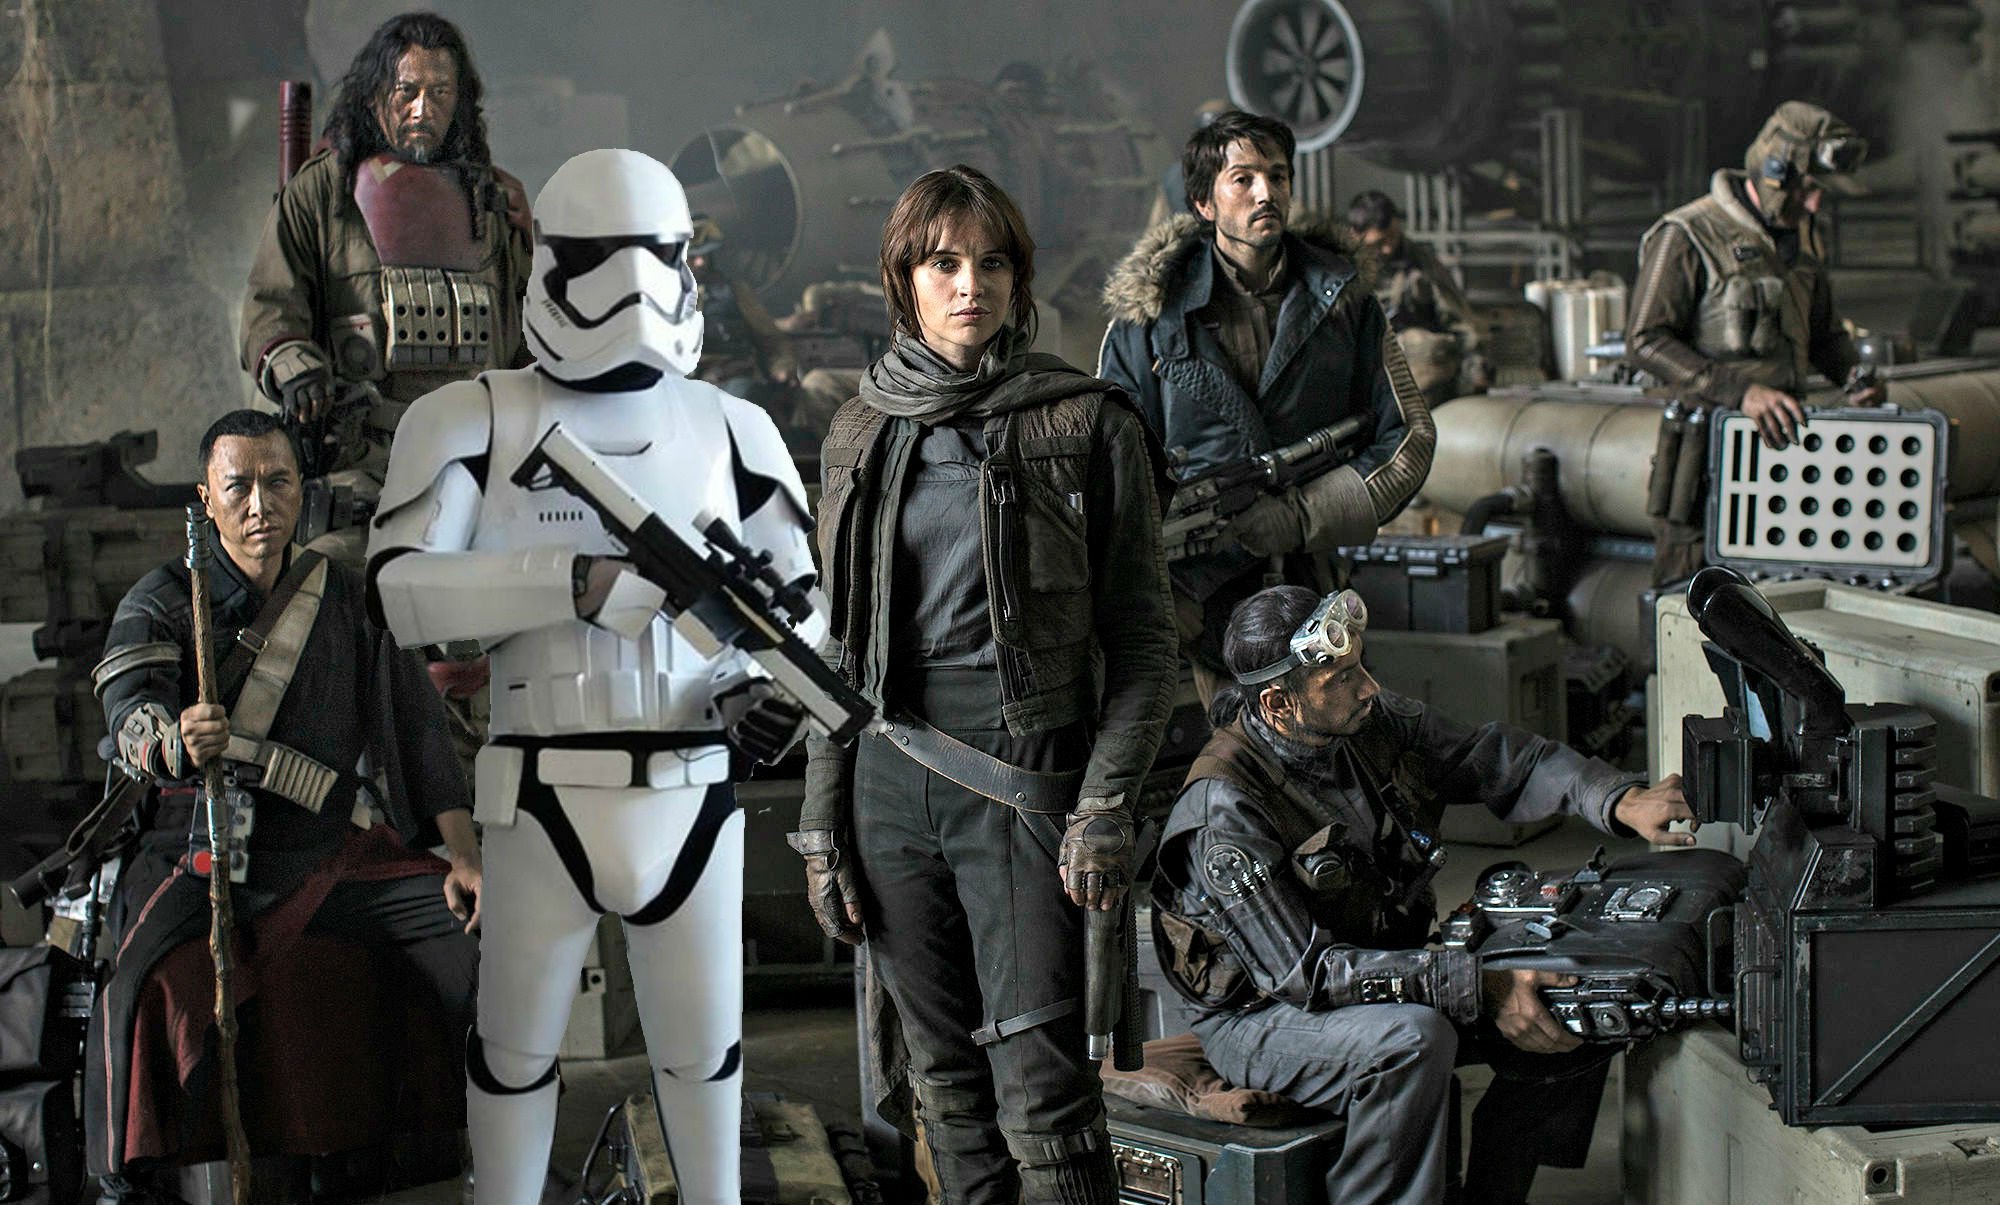 rogue one a star wars story cast